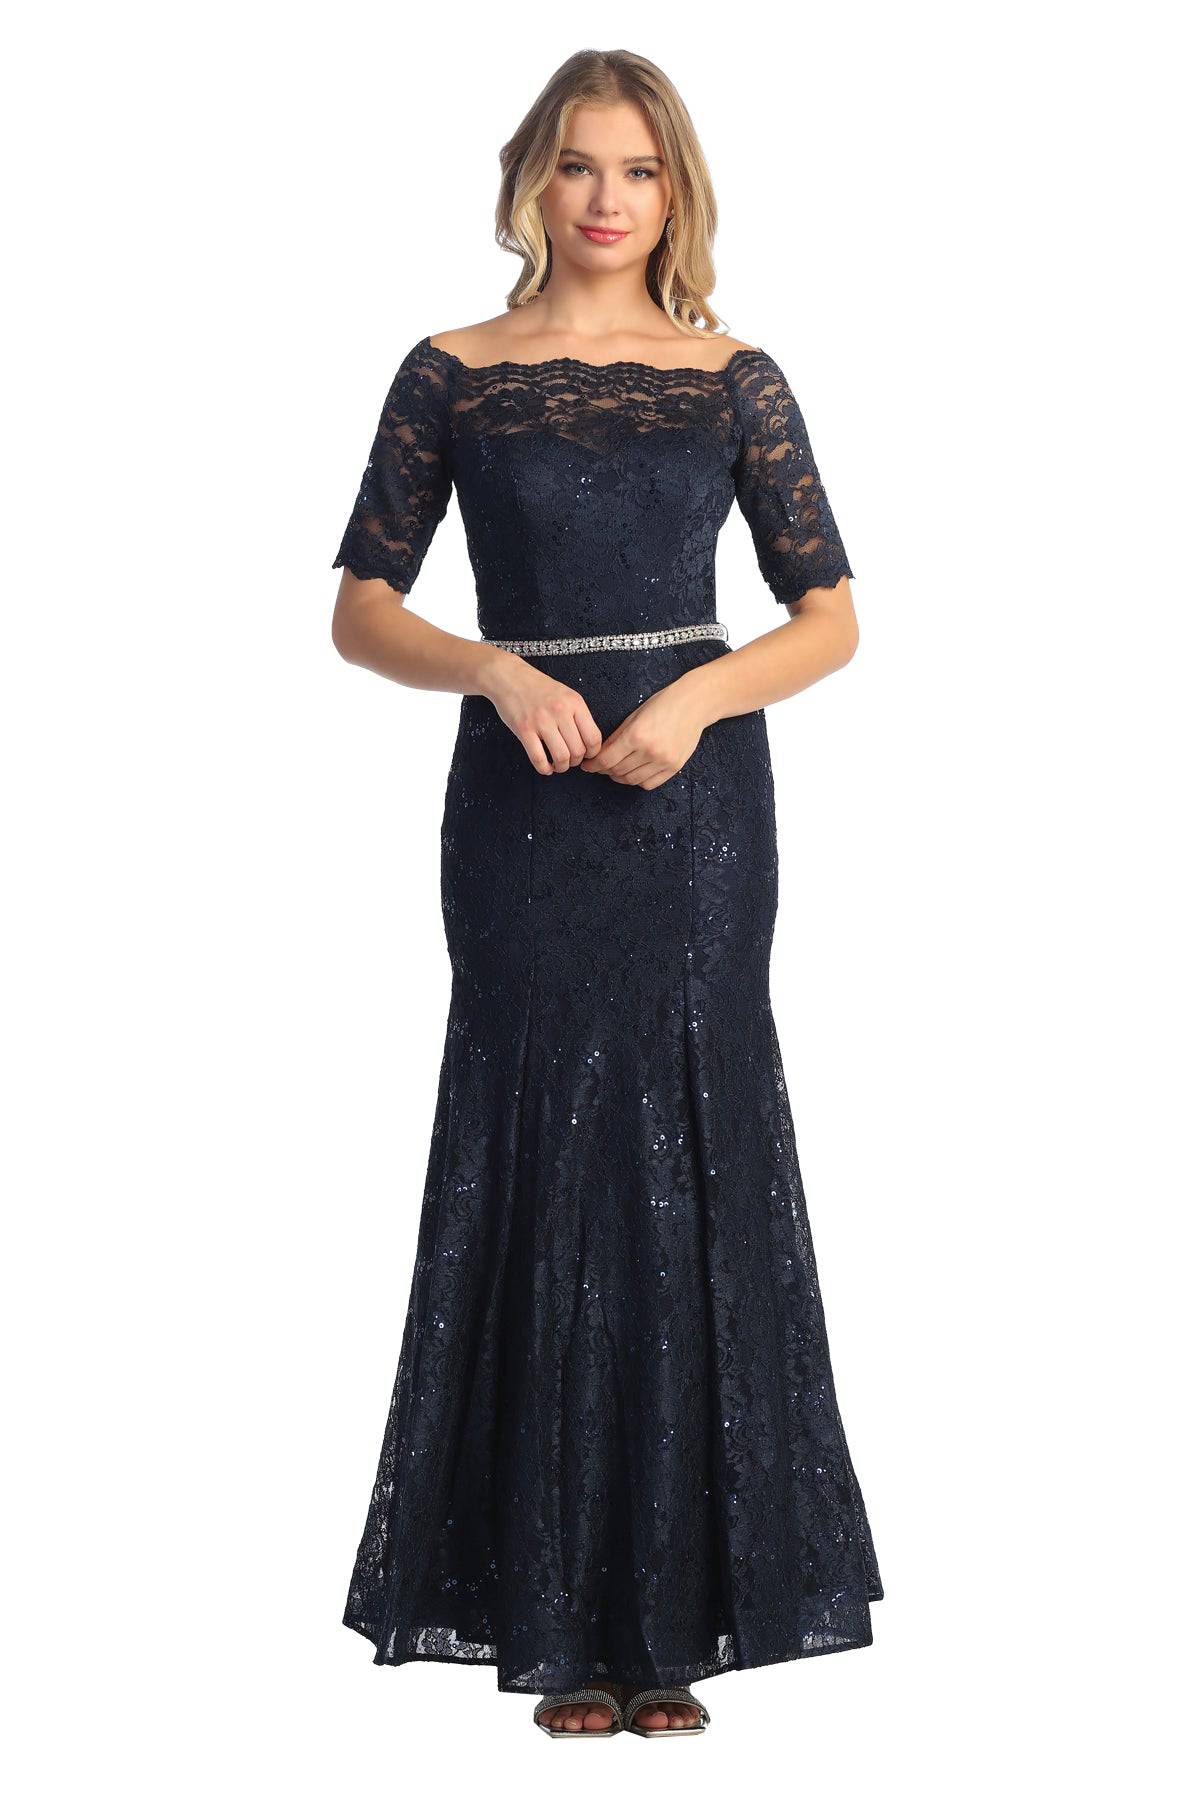 Cindy Collection 1638 Half Sleeve Mermaid Dress - NORMA REED